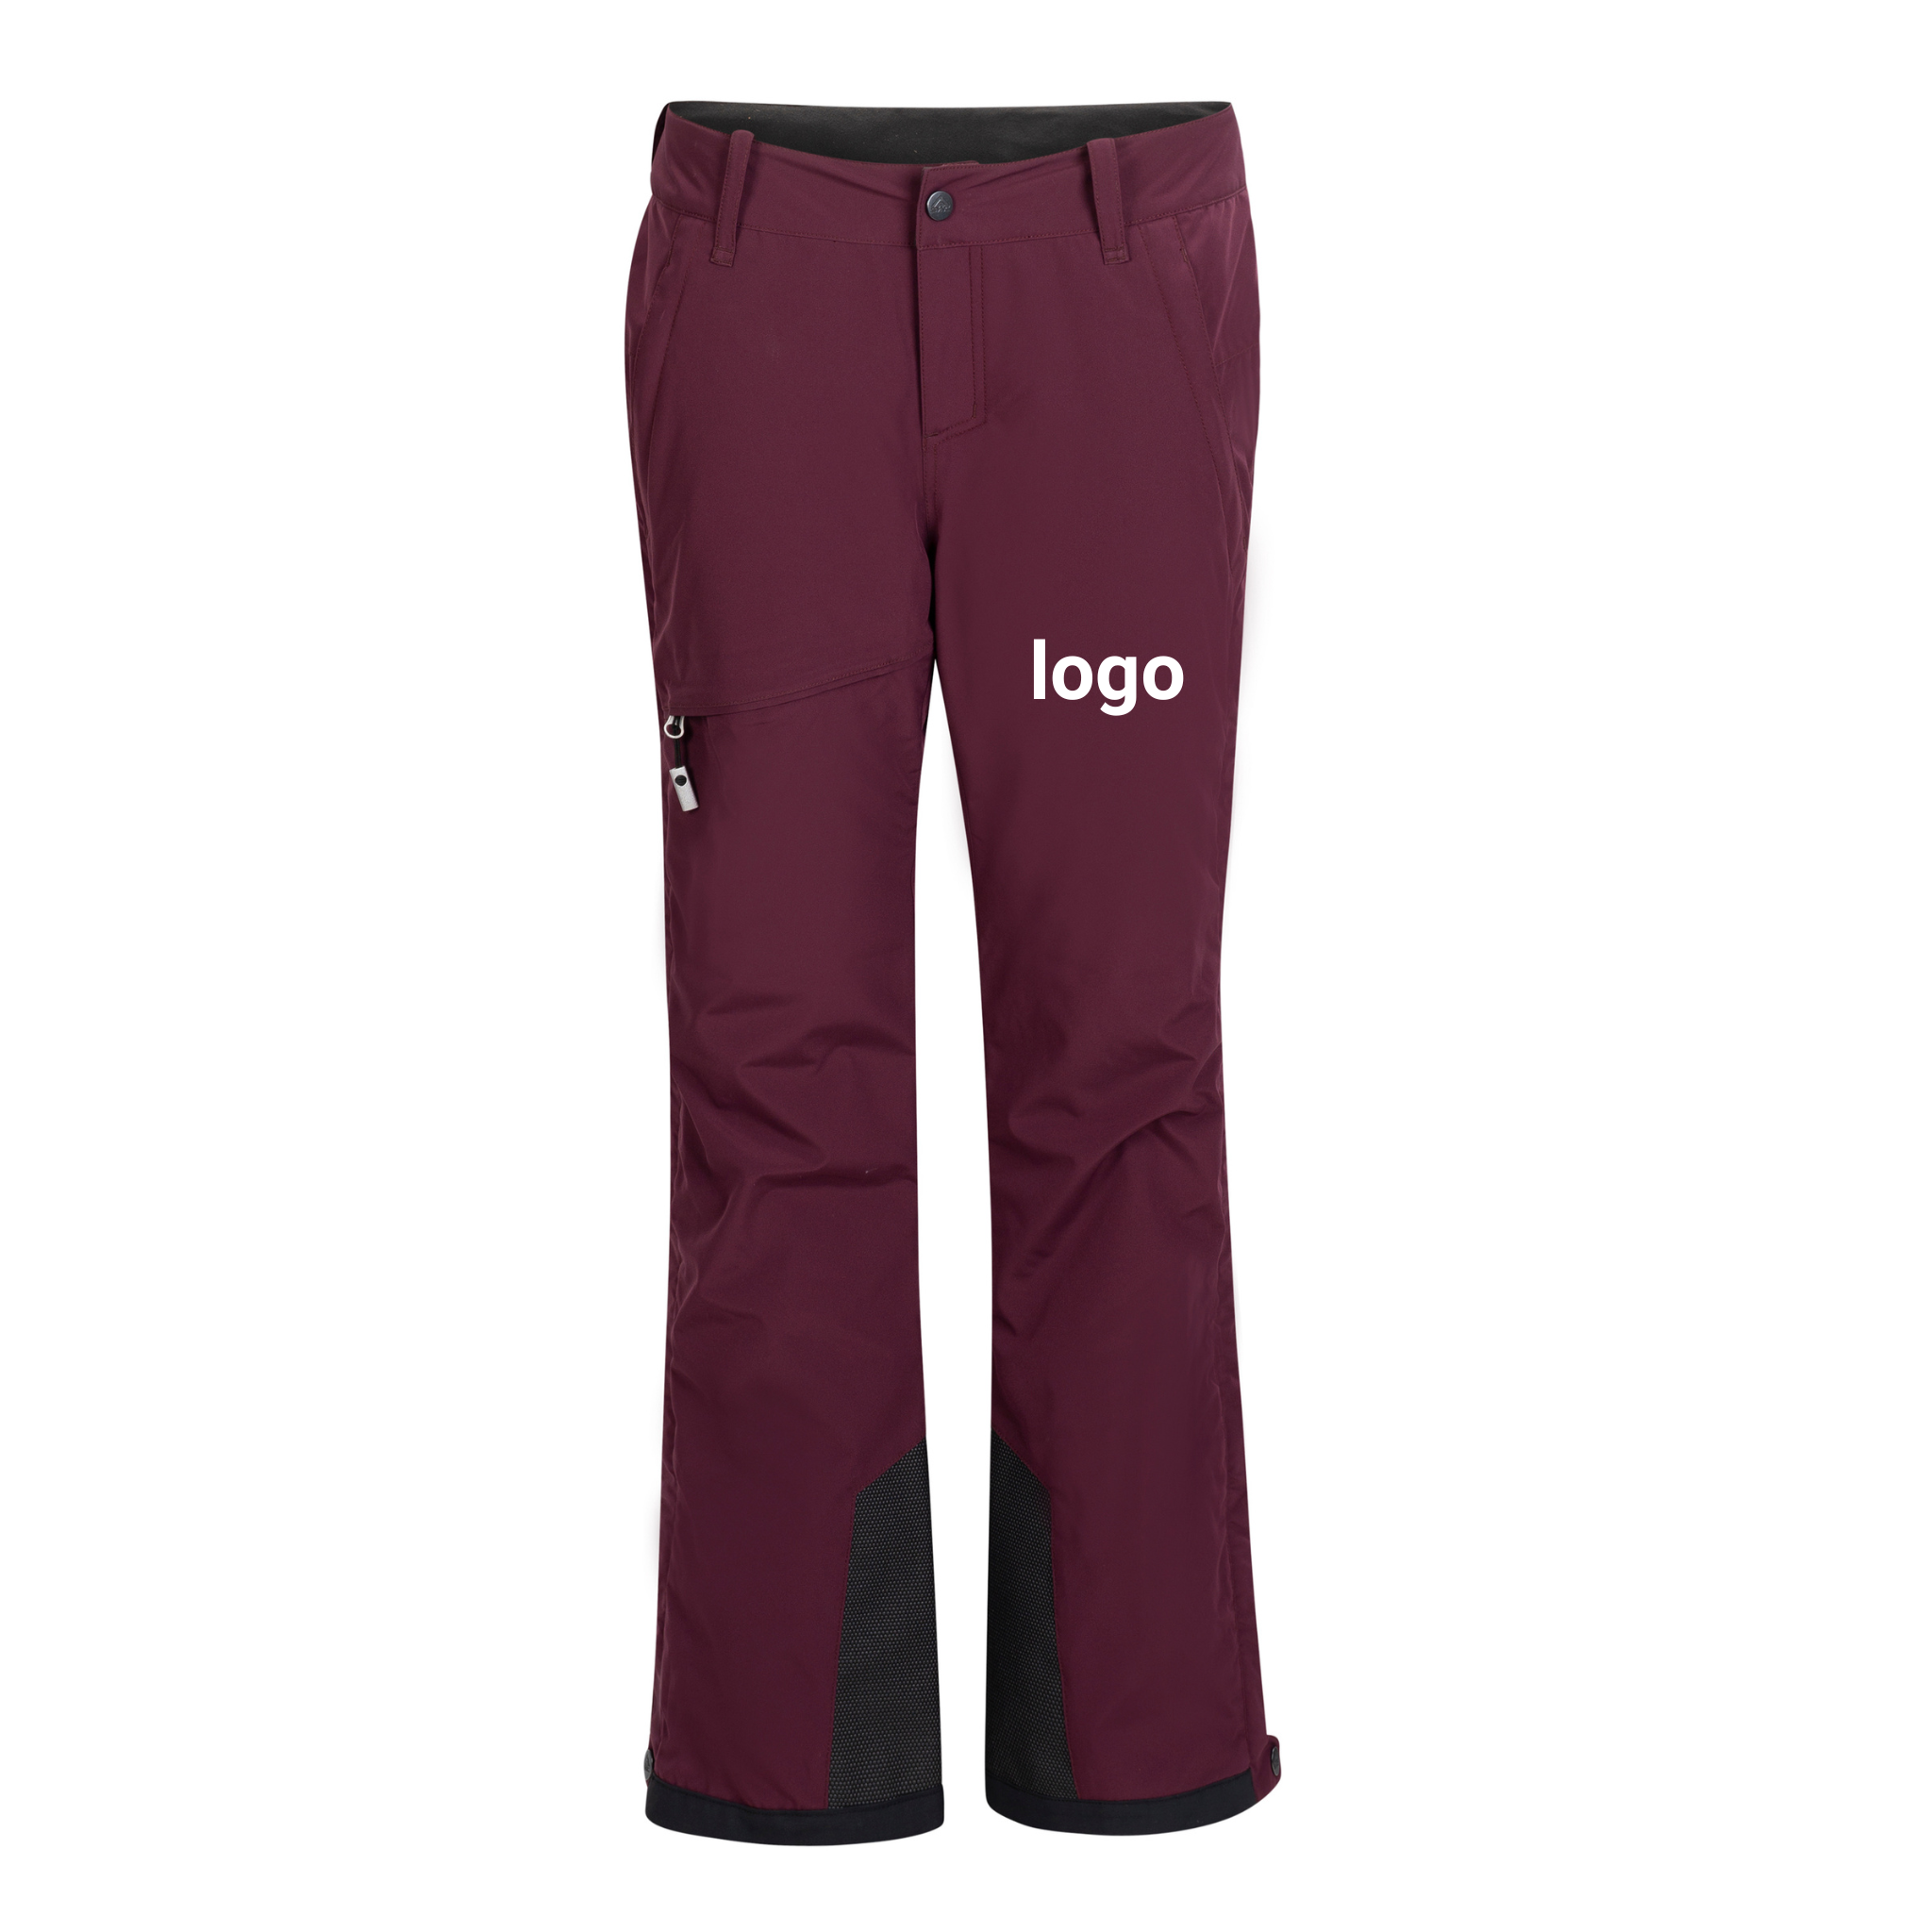 Women's Top Step Pant - Example